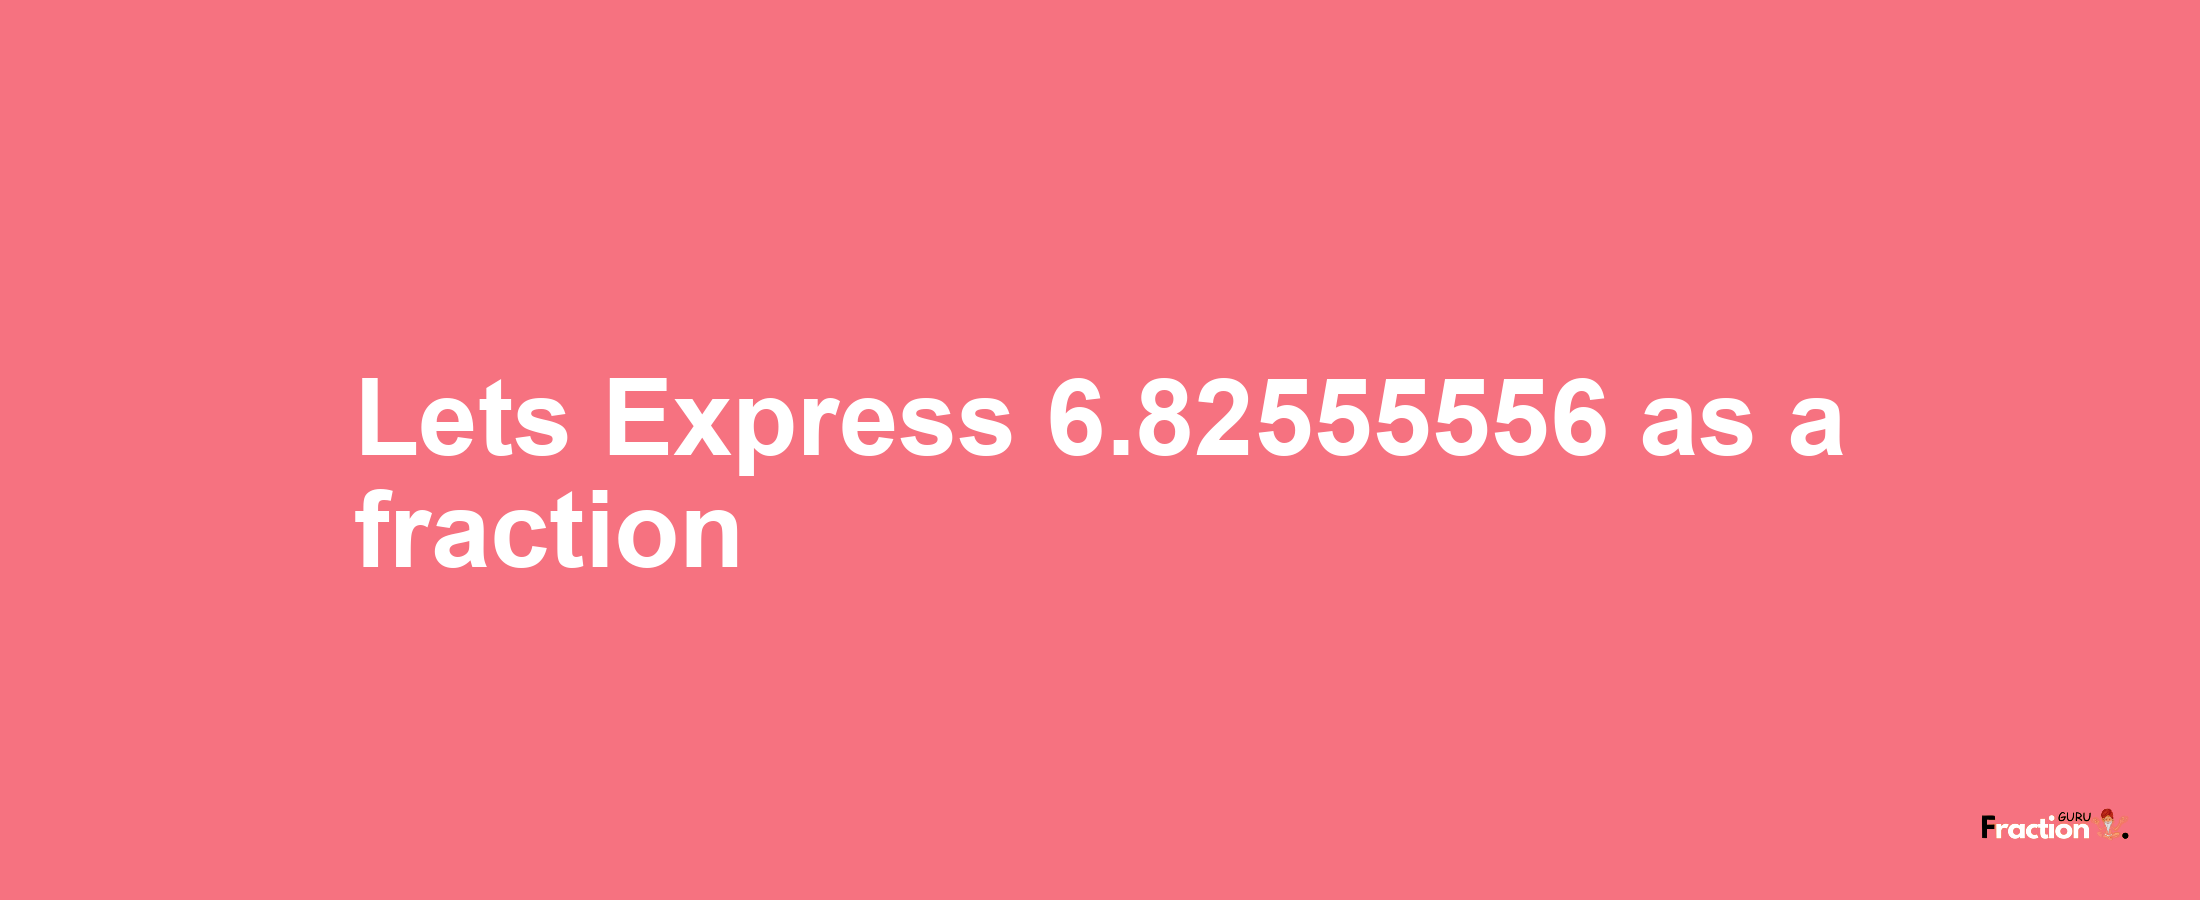 Lets Express 6.82555556 as afraction